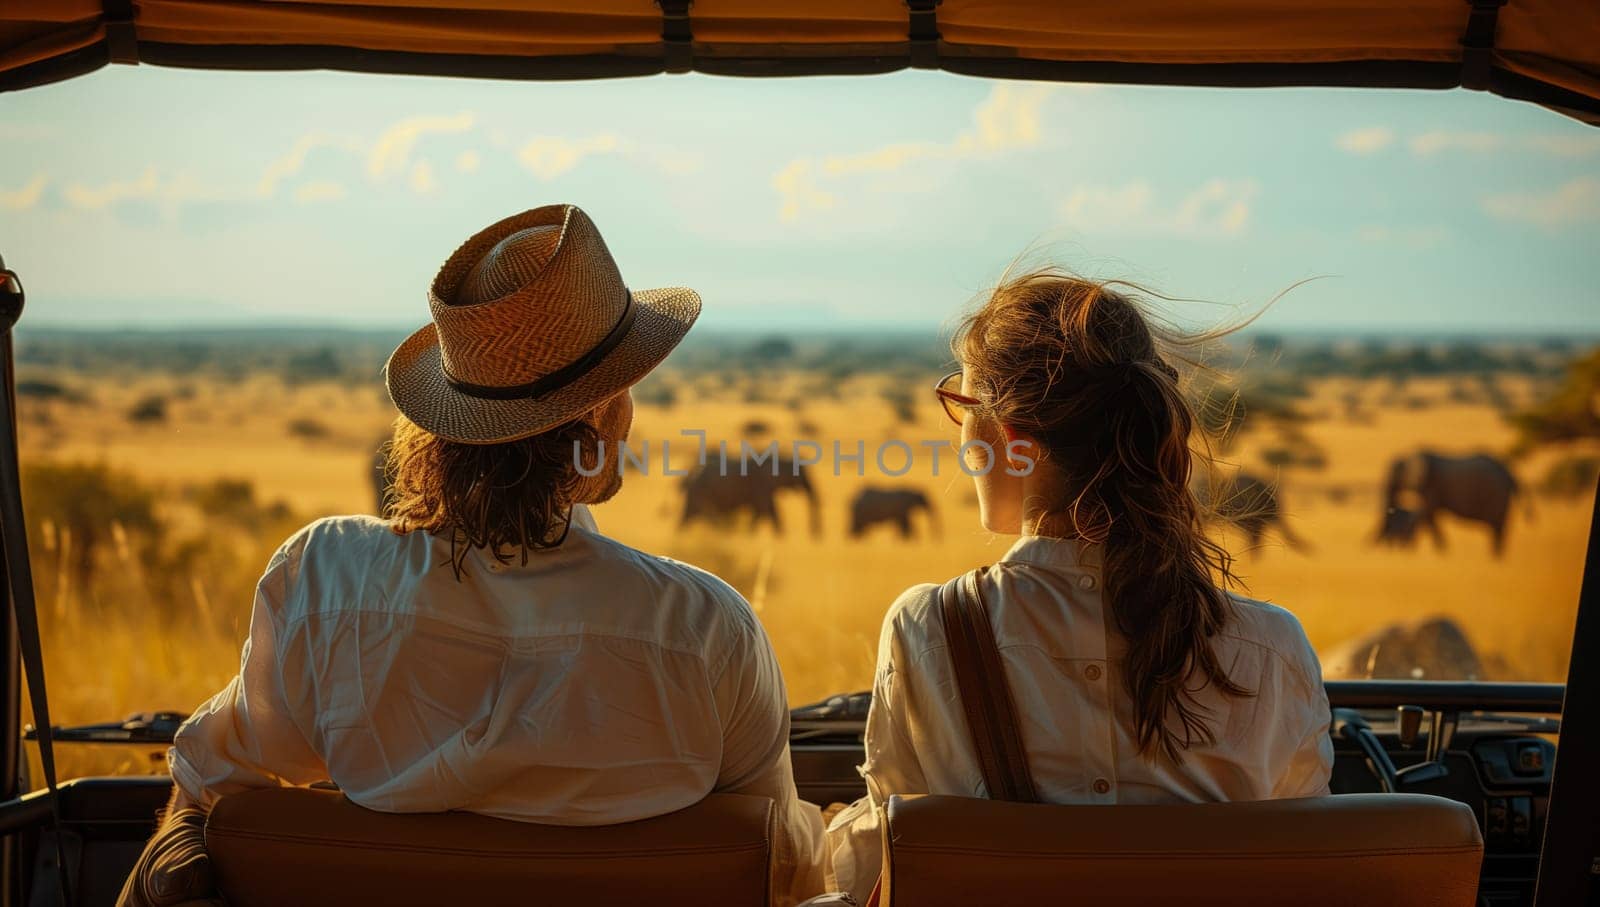 Woman and a man in sun hats are seated in the back of a jeep, admiring elephants in the landscape. They seem happy and are sharing a fun moment together under the sunny sky